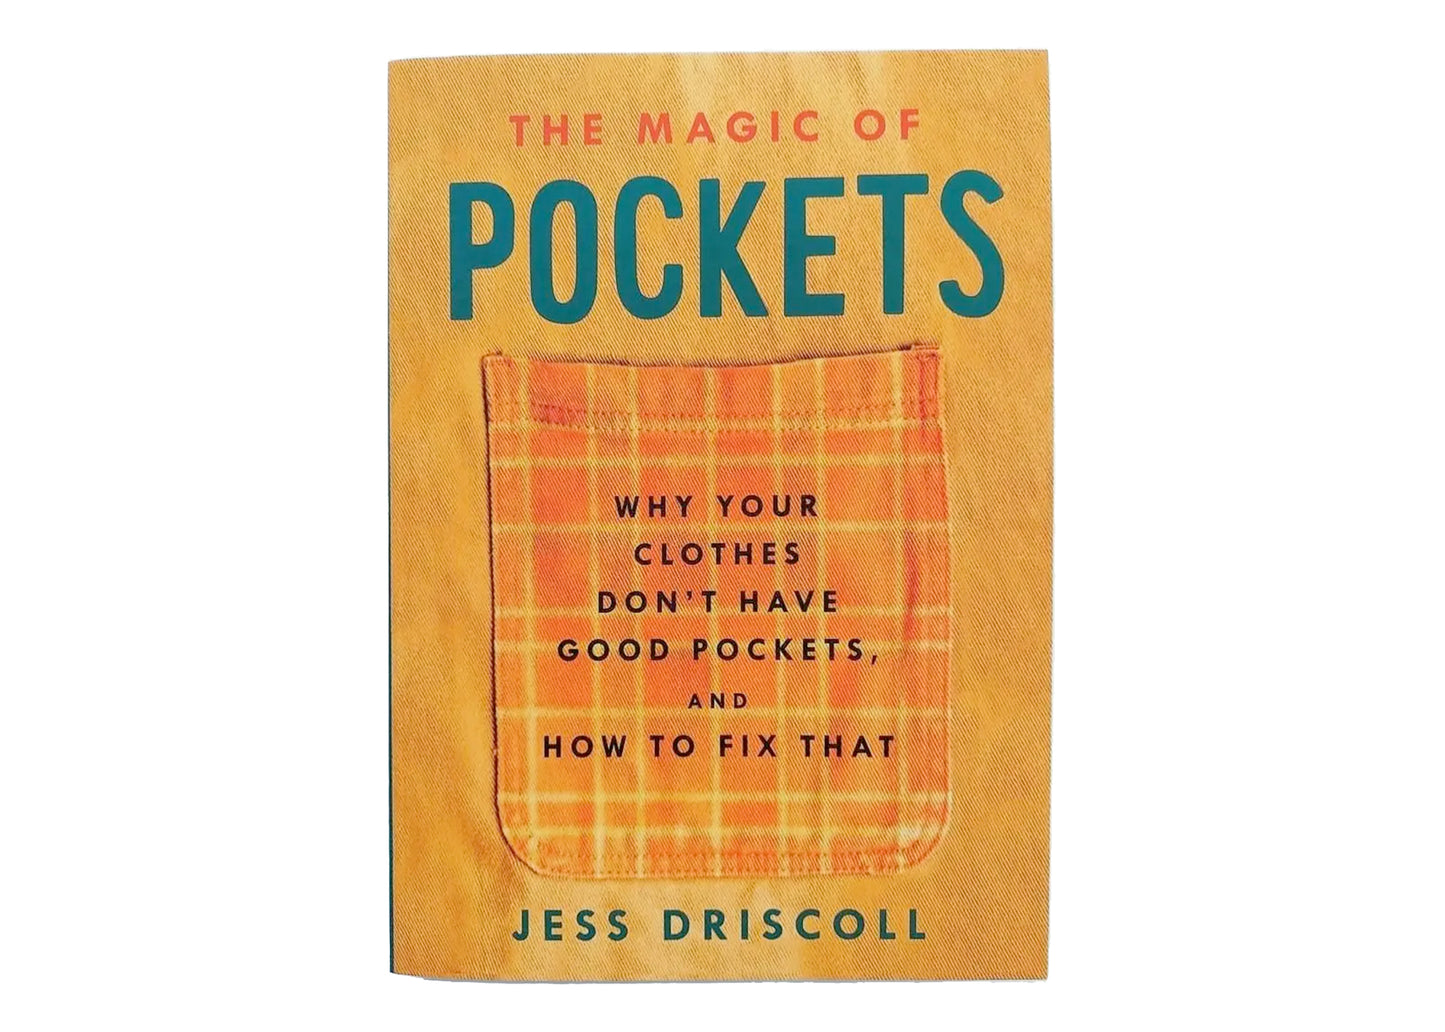 The Magic of Pockets: Guide to Sewing & Fixing Pockets